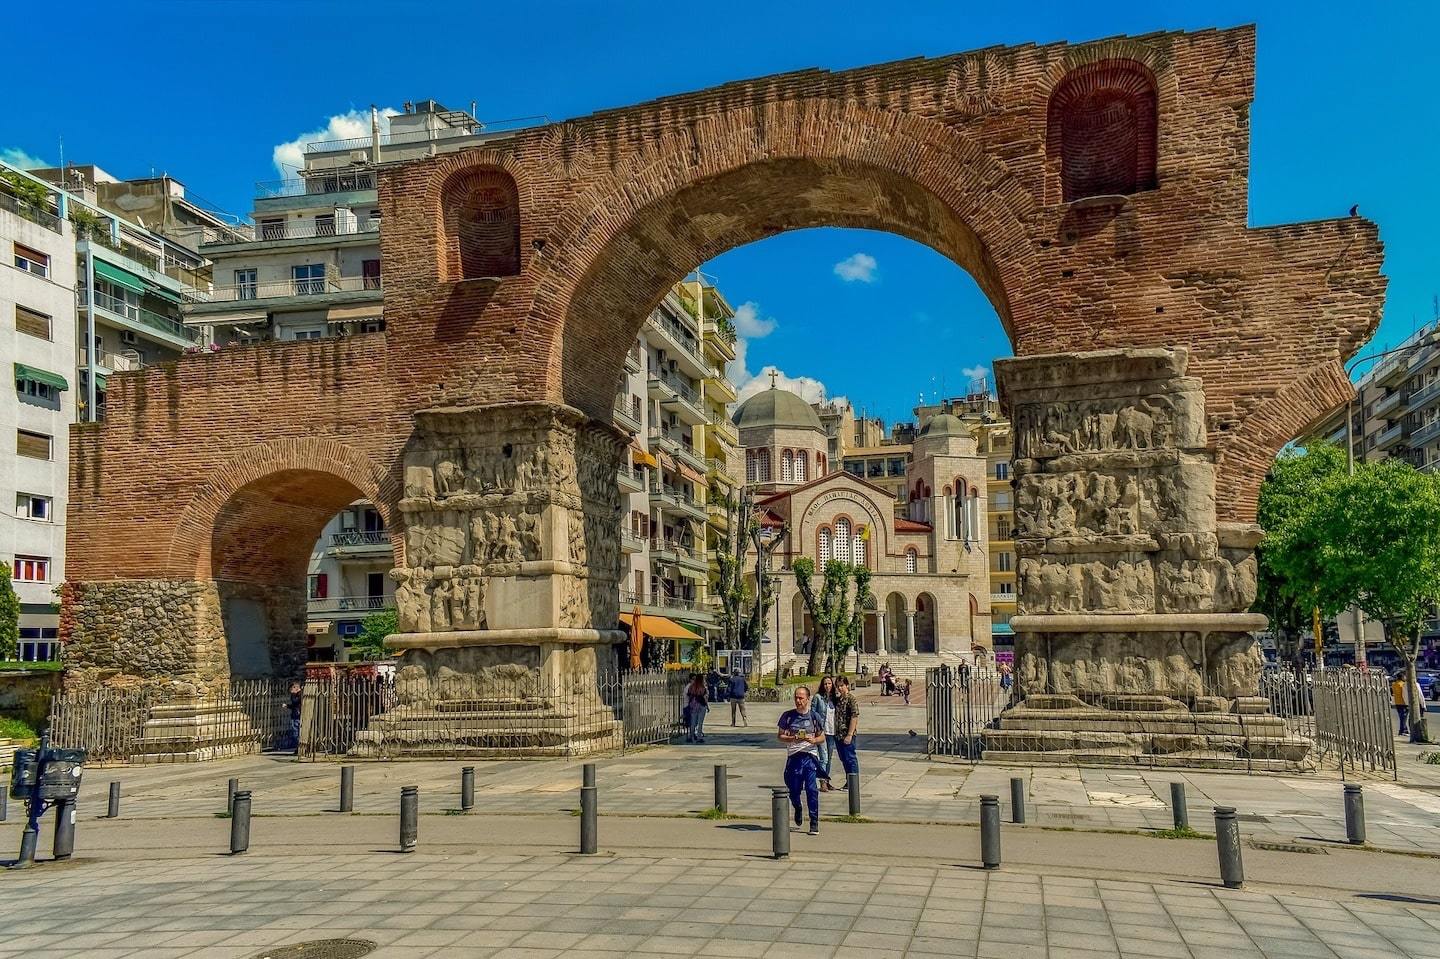 Where to Go in Greece: Remains of a Roman Bridge looking into the city under a blue sky in Thessaloniki, Greece.